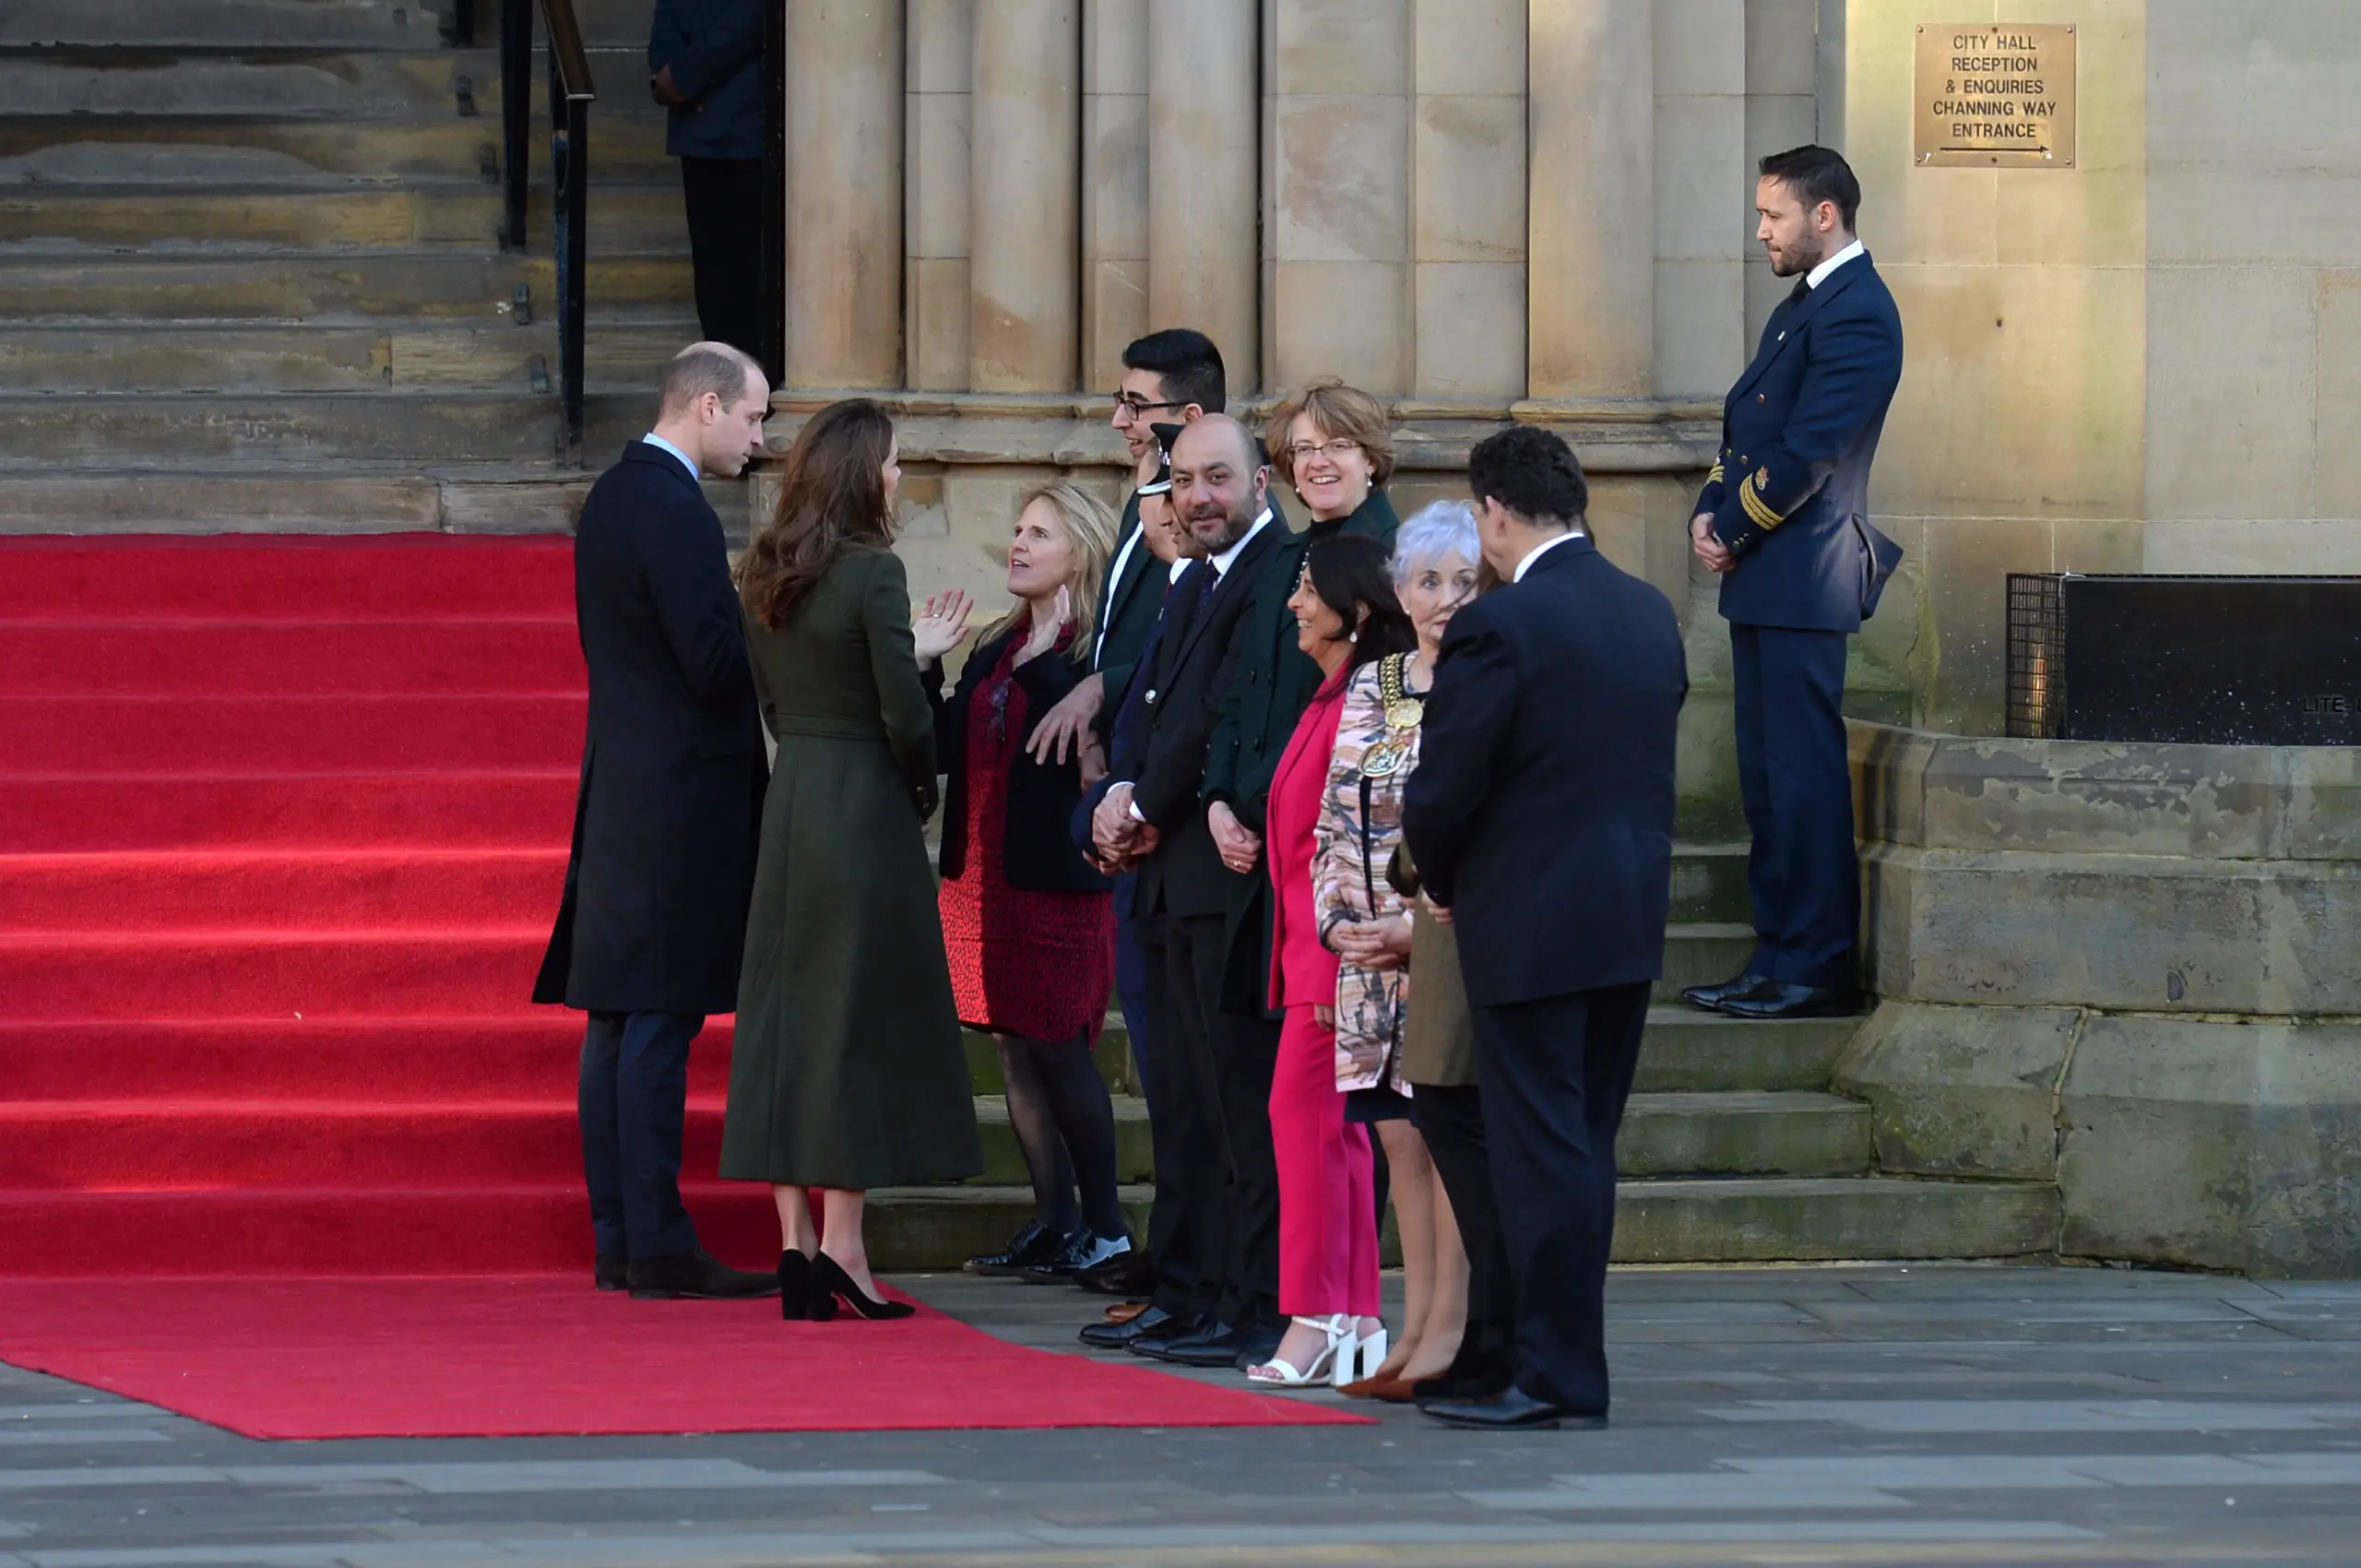 The Duke and Duchess of Cambridge visited several projects which support the community while bringing a spotlight to the vibrant culture and community of Bradford.